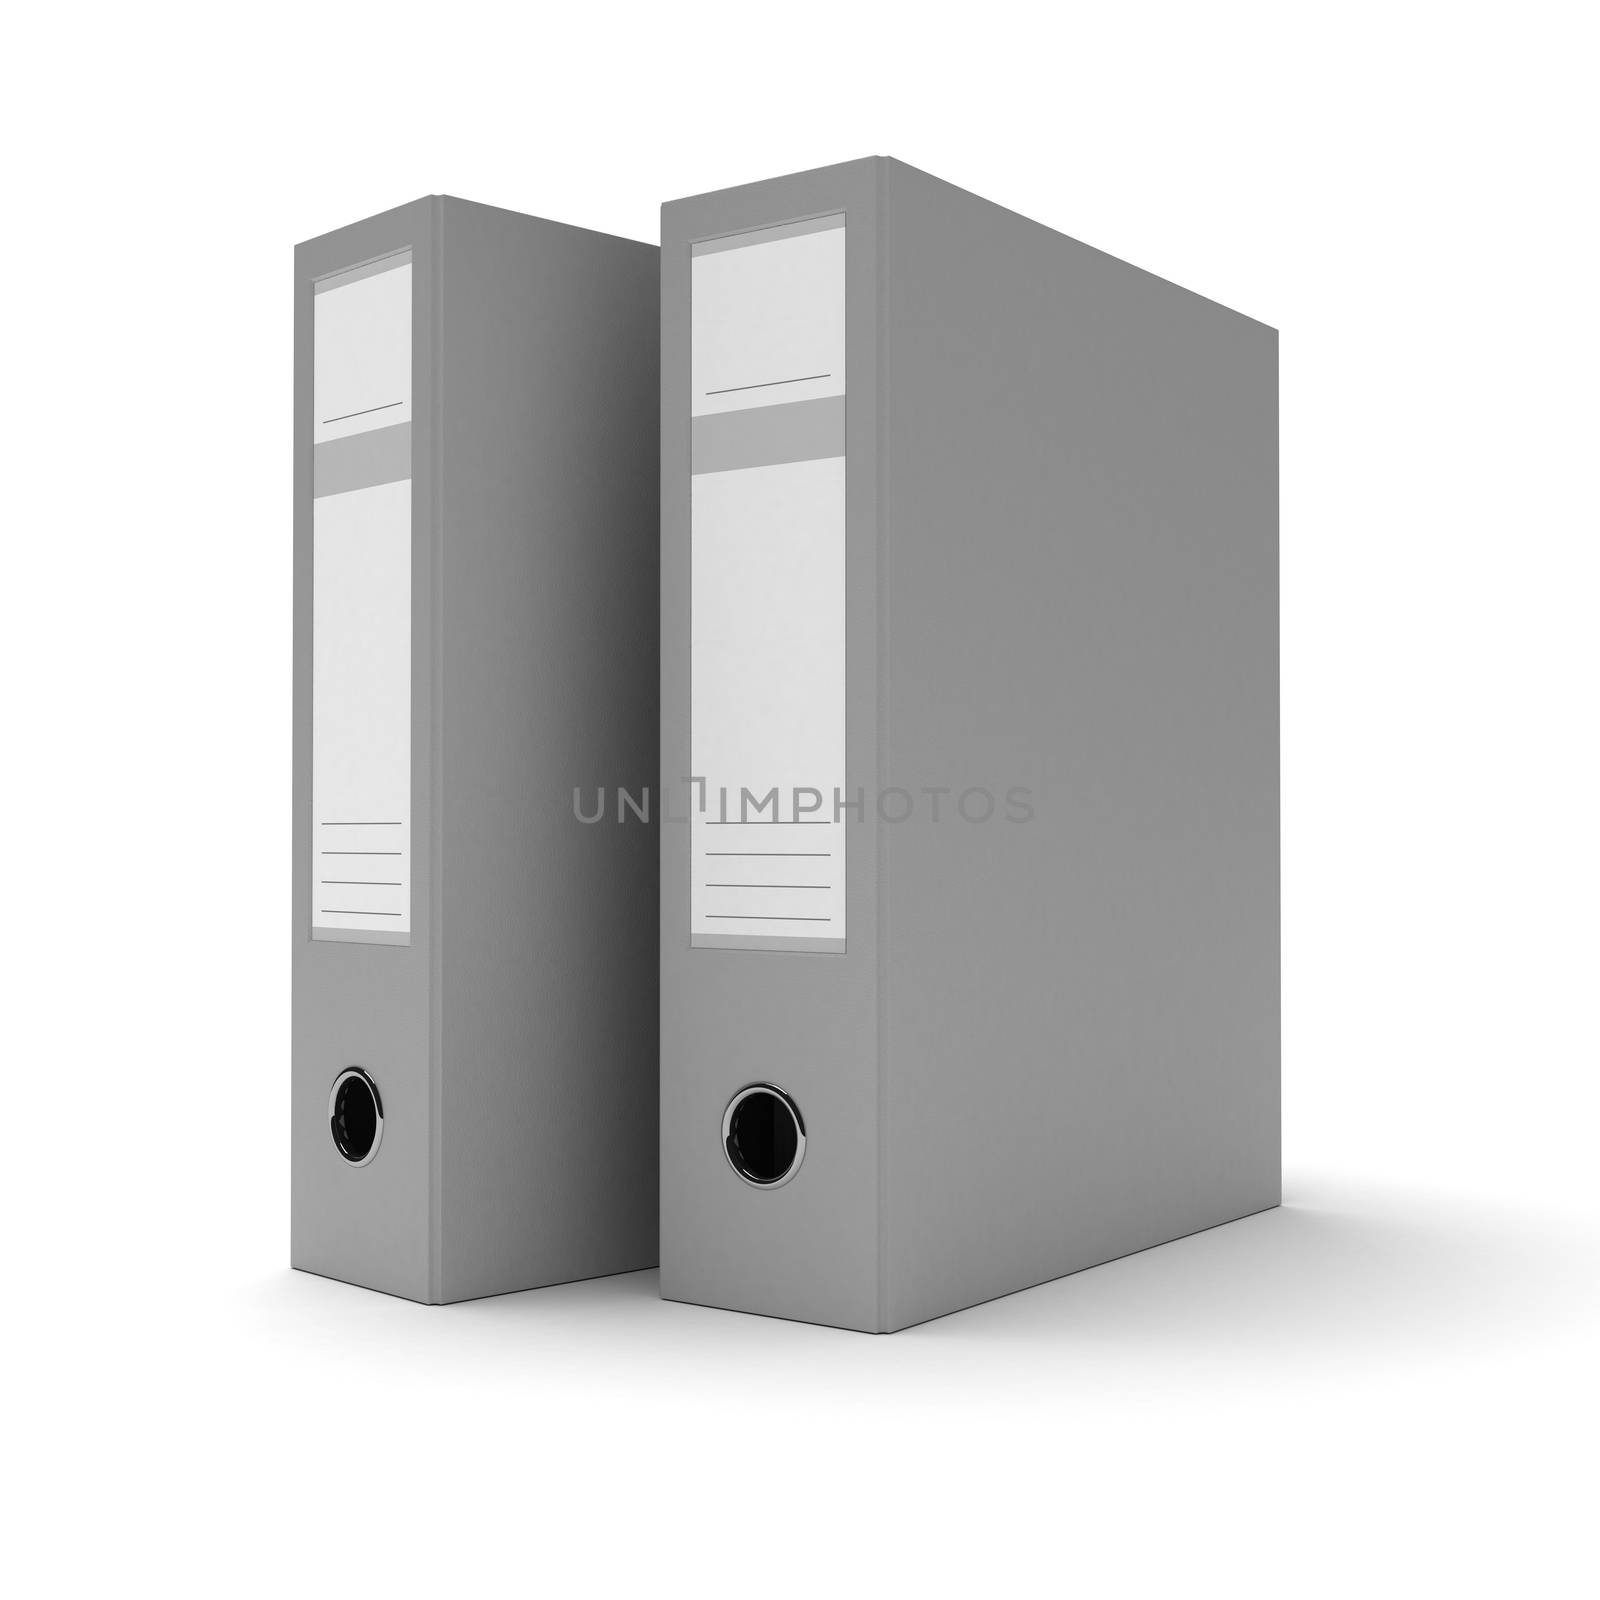 Two ring binders on white background